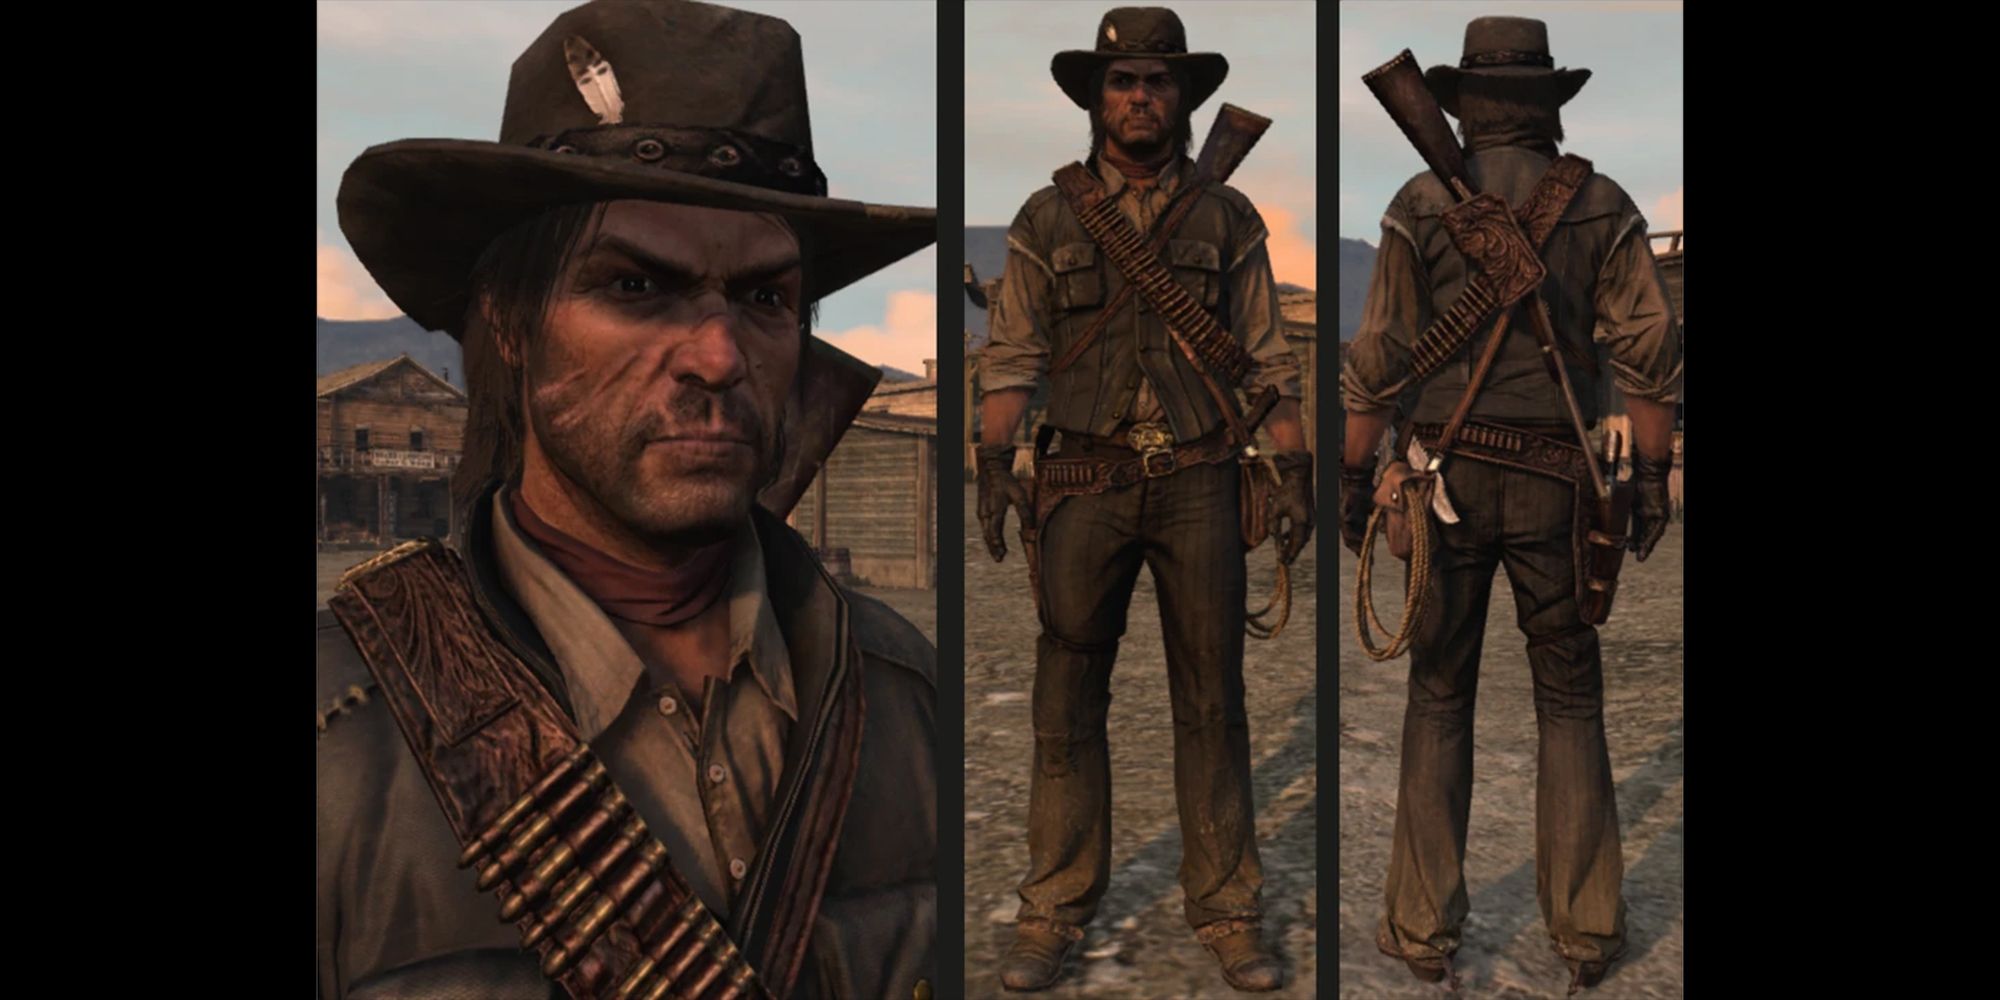 The Cowboy Outfit RDR2